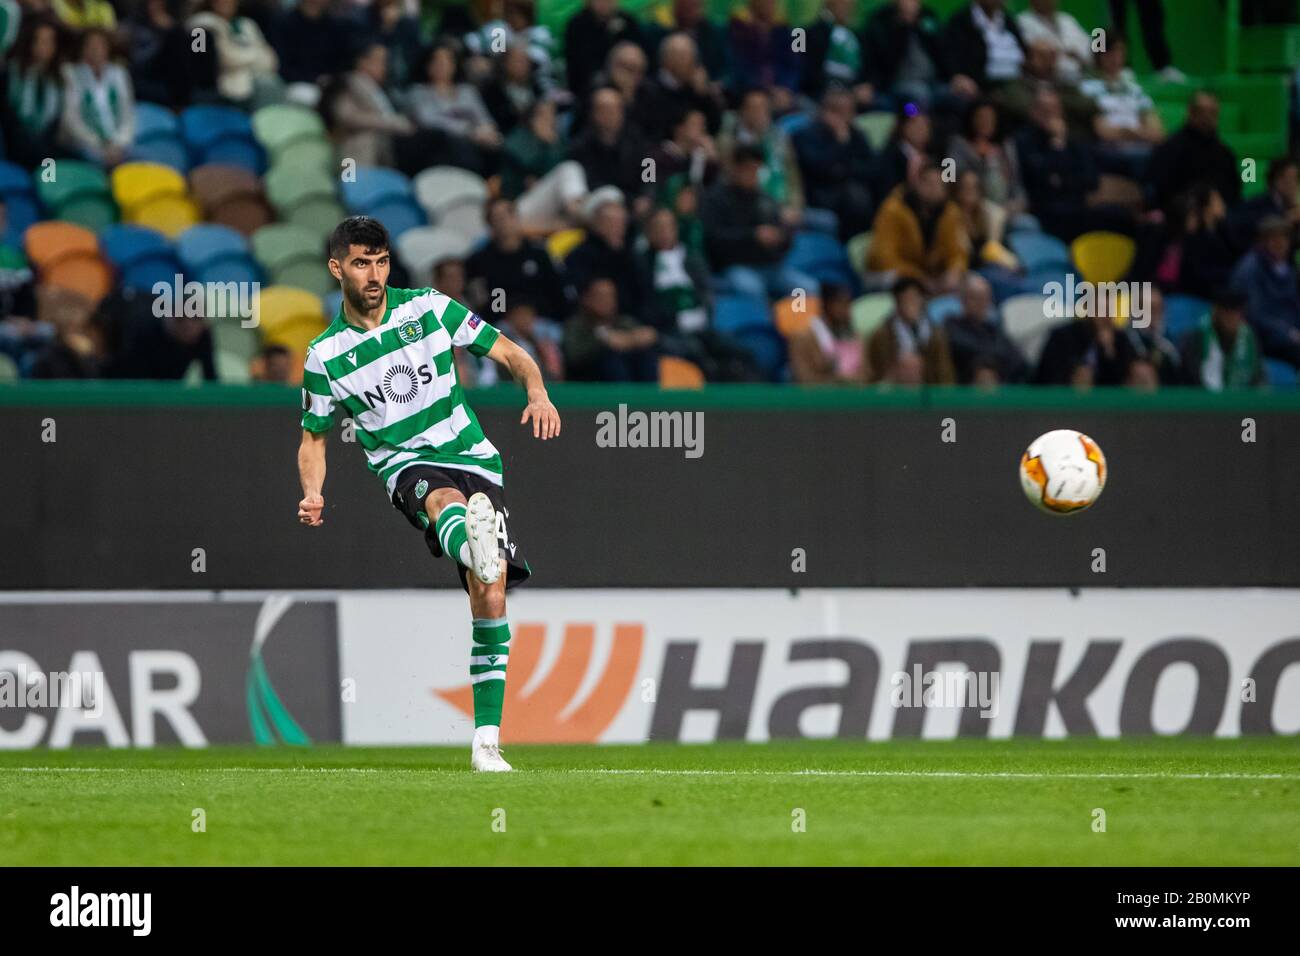 Luis Neto of Sporting CP seen in action during the UEFA Europa League 1st leg of Round of 32 match between Sporting CP and Istanbul Basaksehir at Jose Alvalade Stadium in Lisbon.(Final score; Sporting CP 3:1 Istanbul Basaksehir) Stock Photo